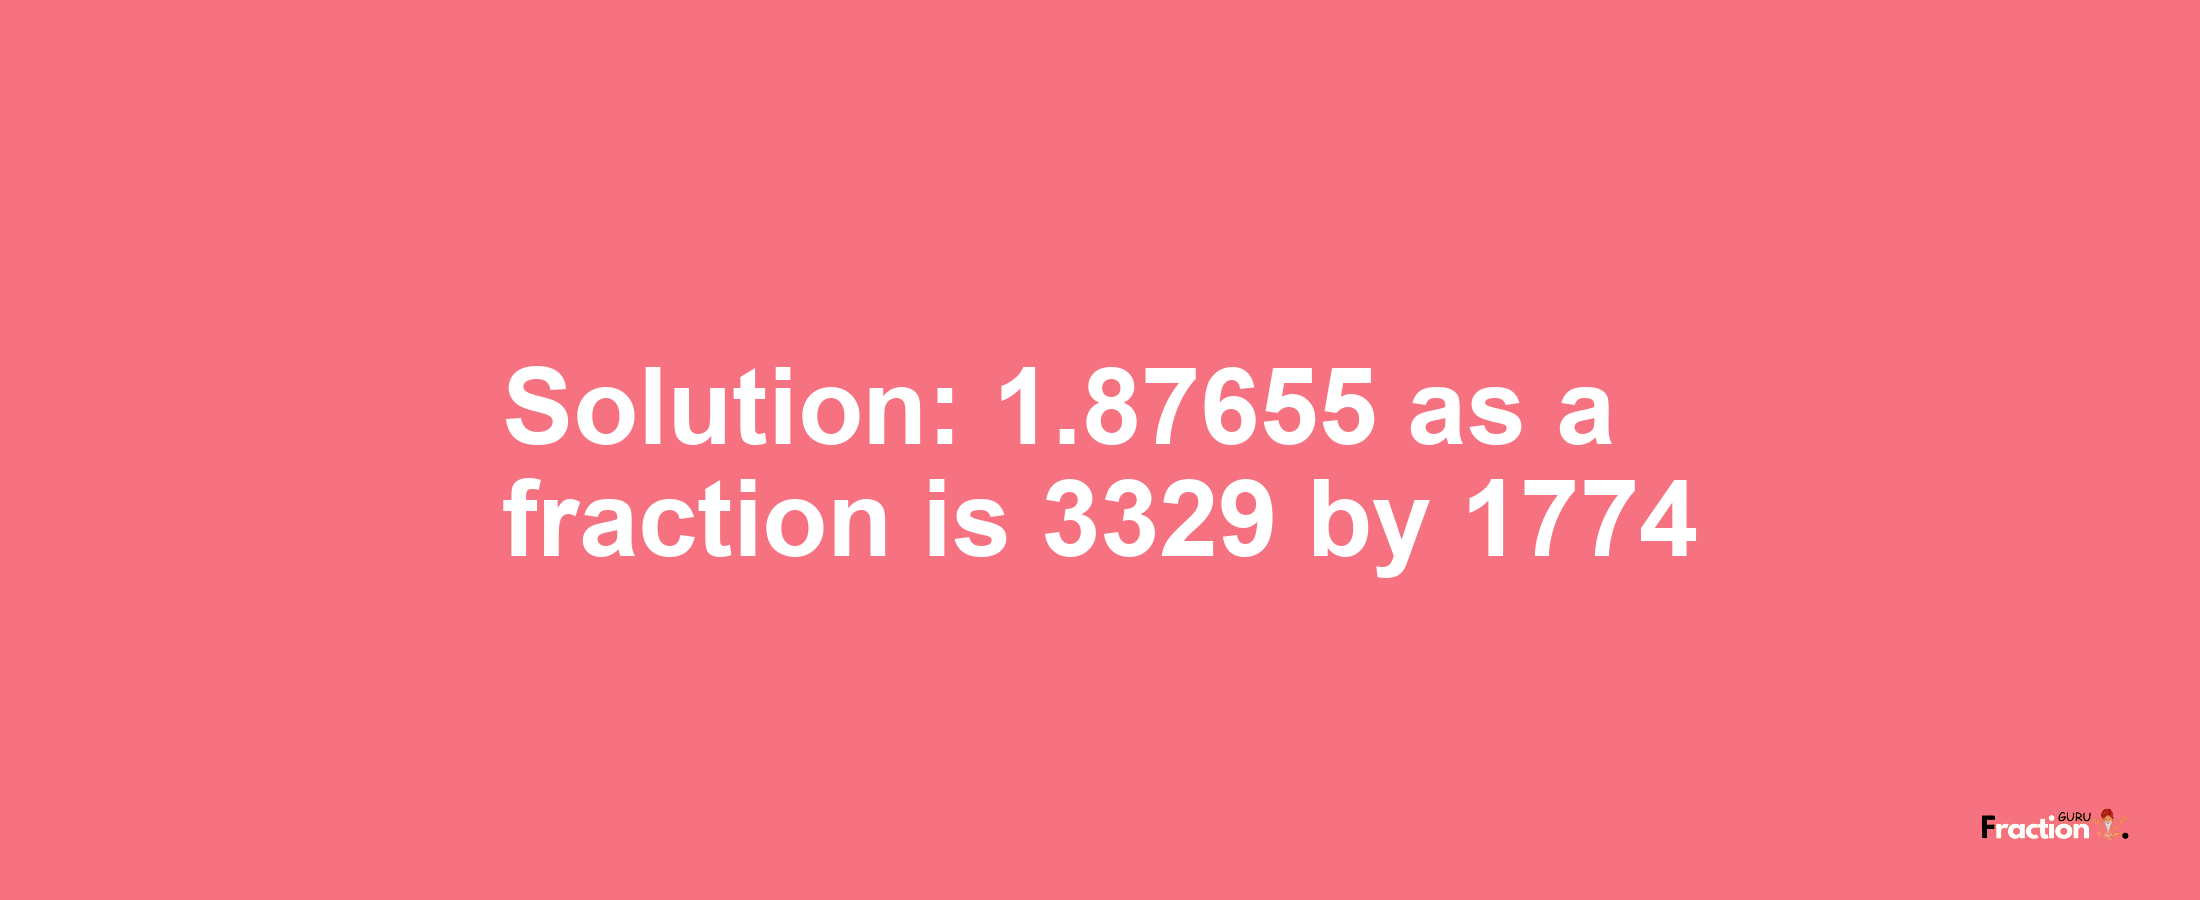 Solution:1.87655 as a fraction is 3329/1774